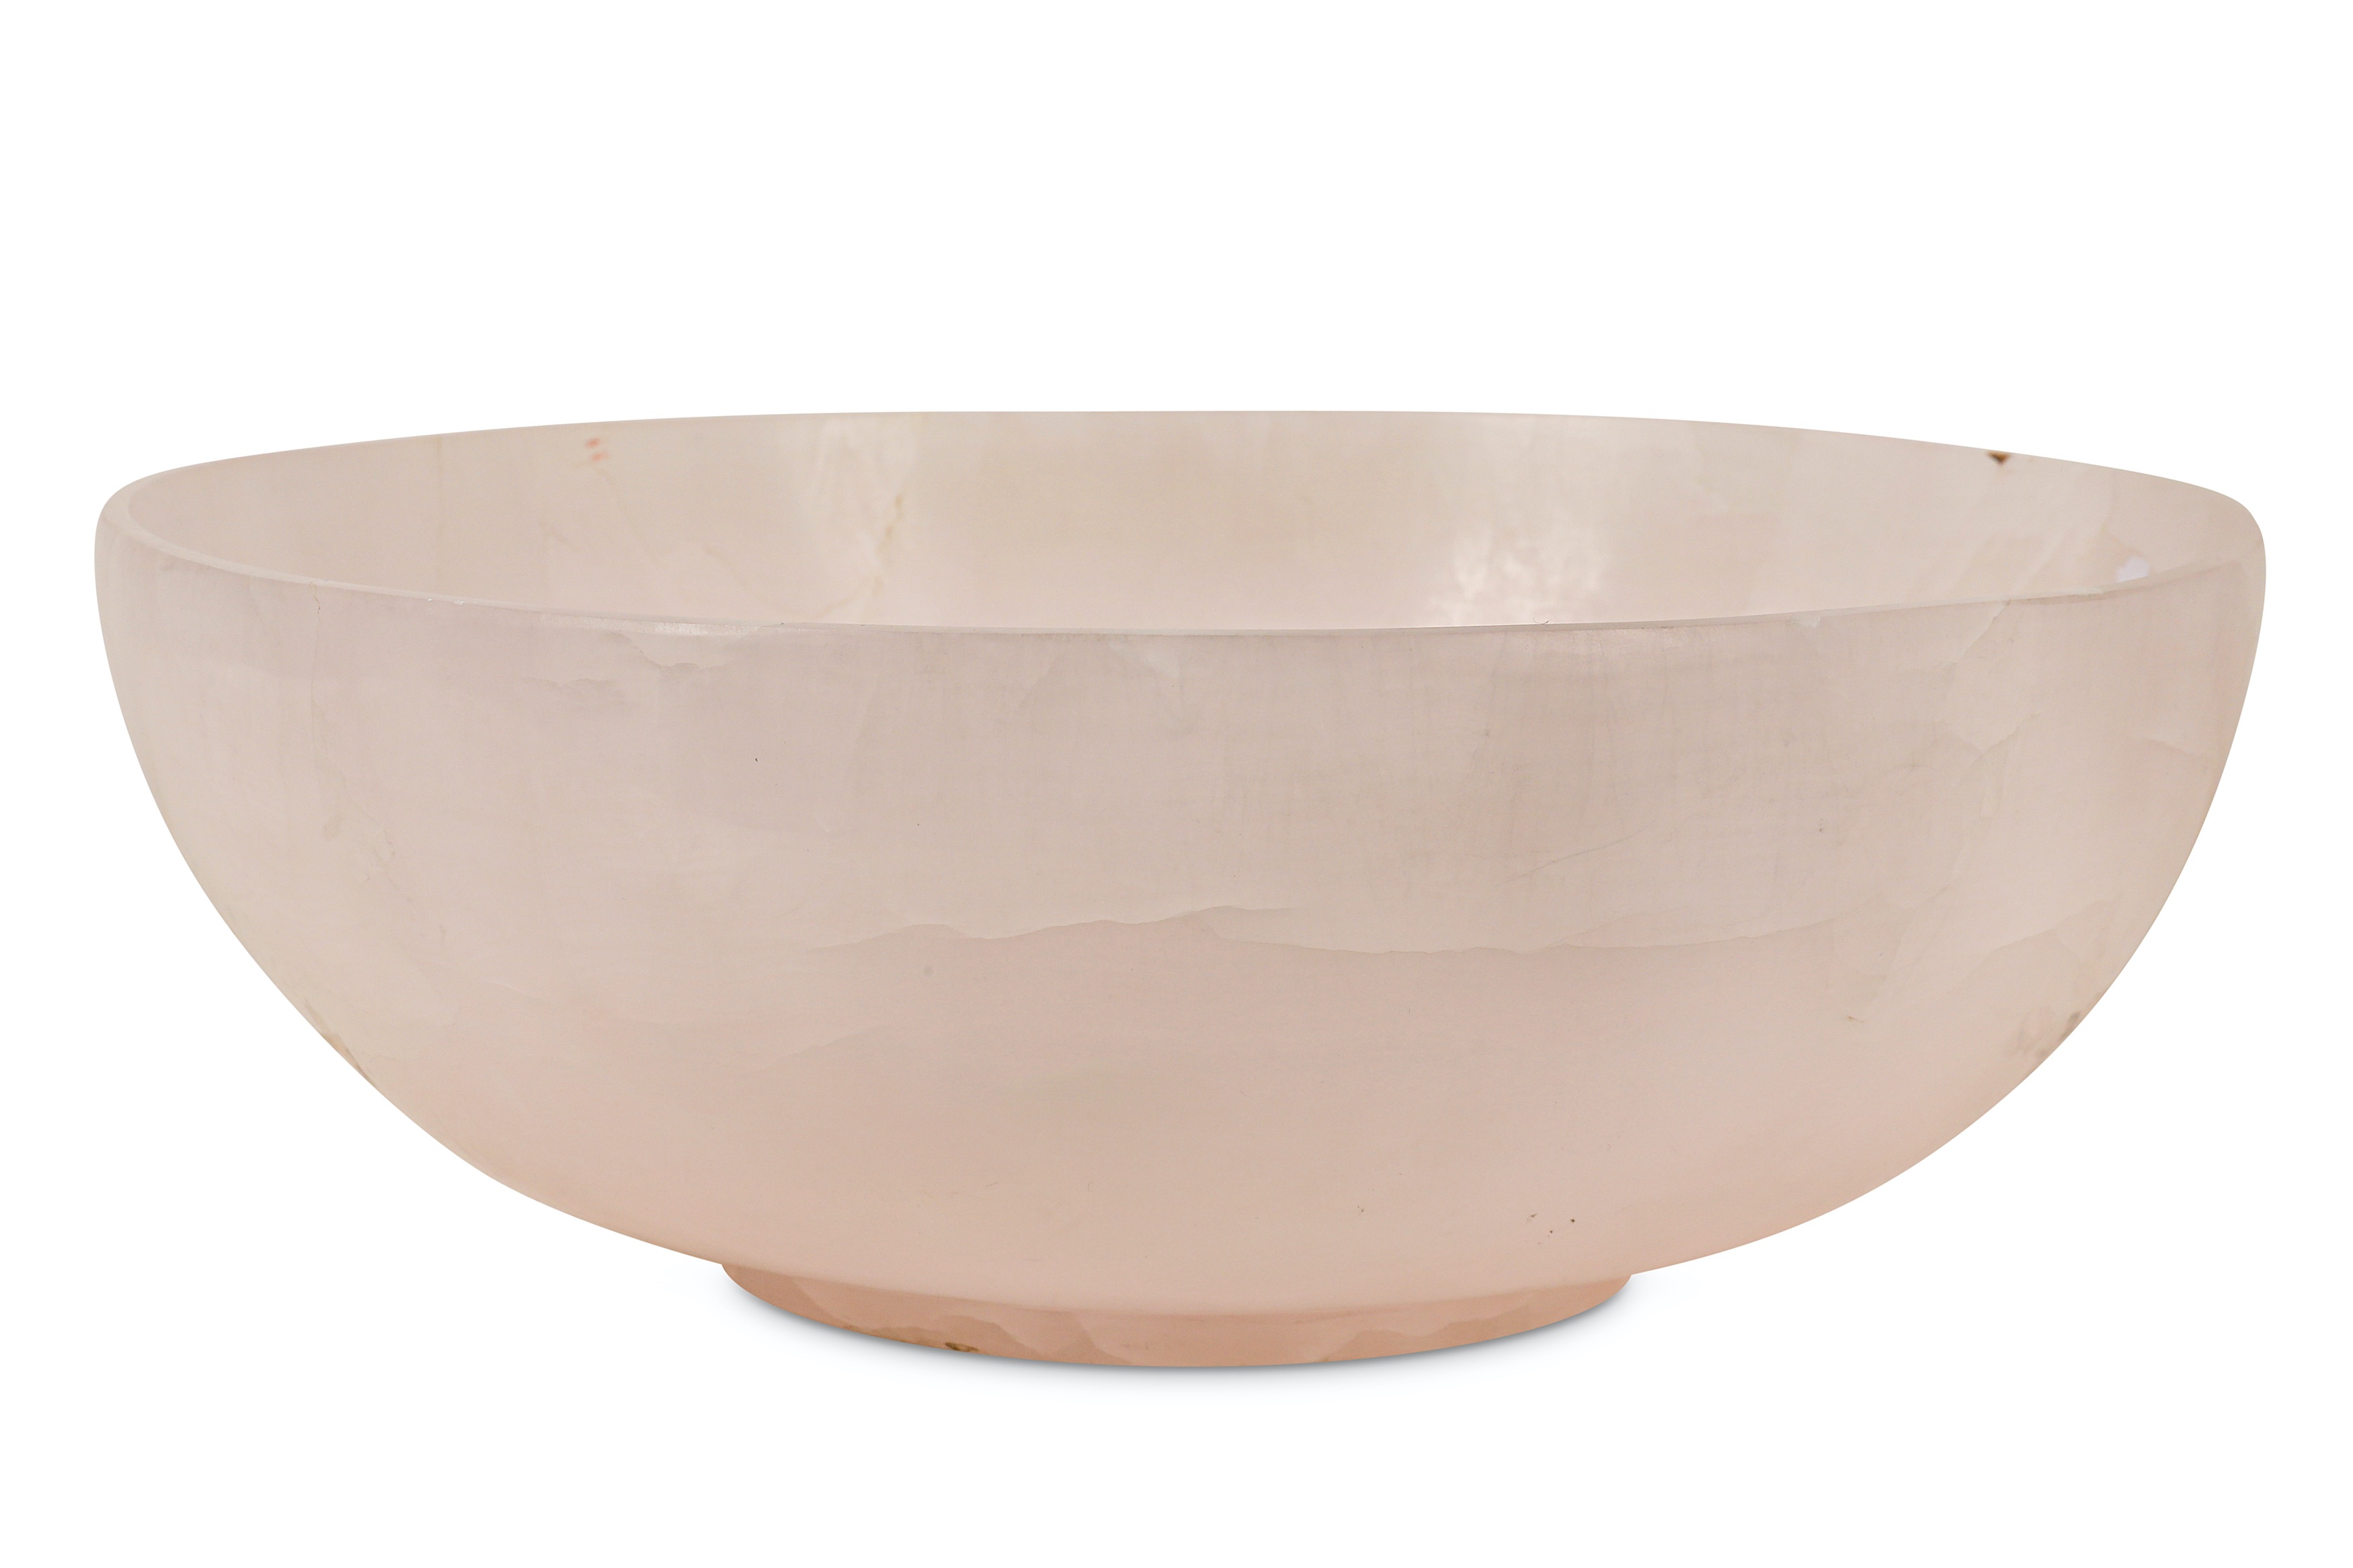 A LARGE AND IMPRESSIVE CARVED PINK MANGANO CALCITE BOWL - Image 3 of 6